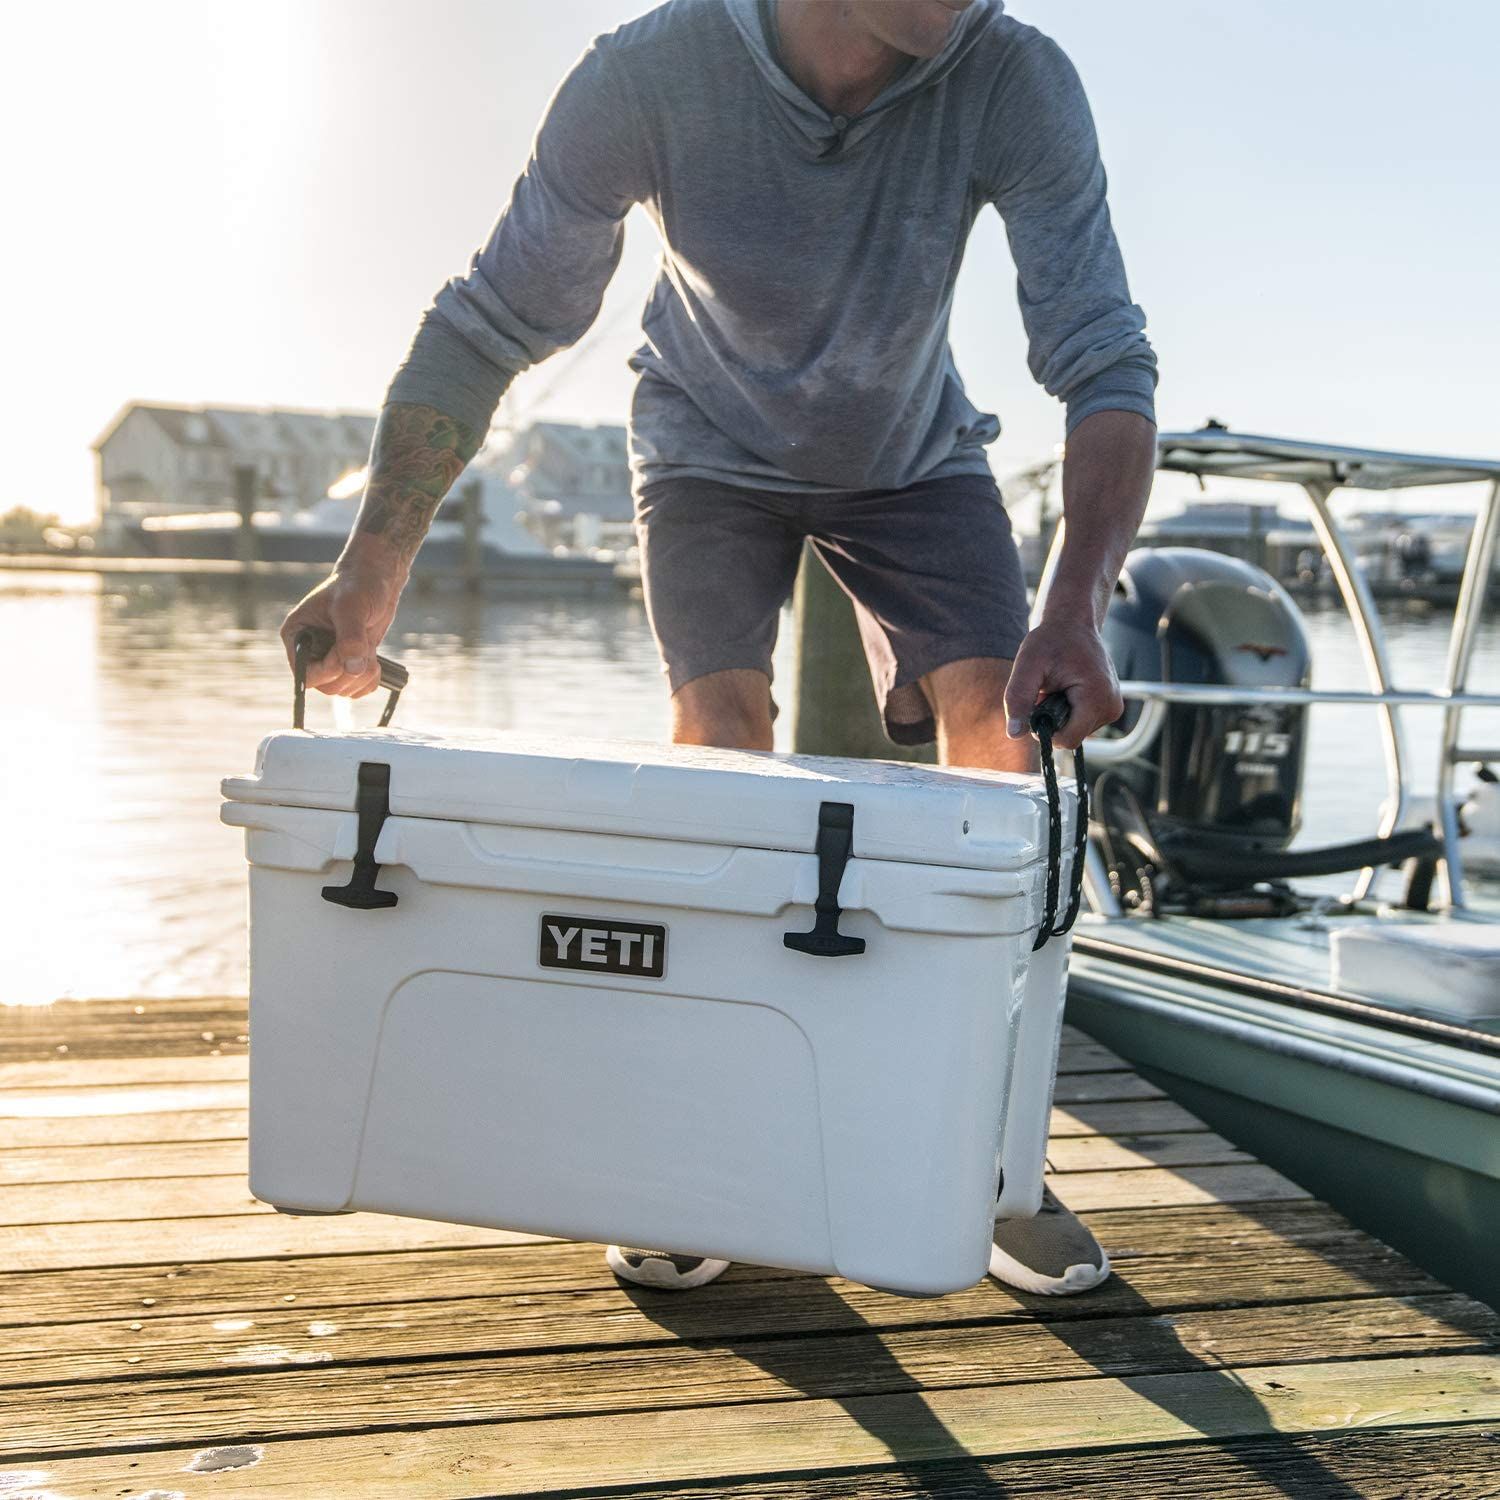 We Found a Way to Save 20% on a Yeti Cooler (and a Ton of Other Gear)